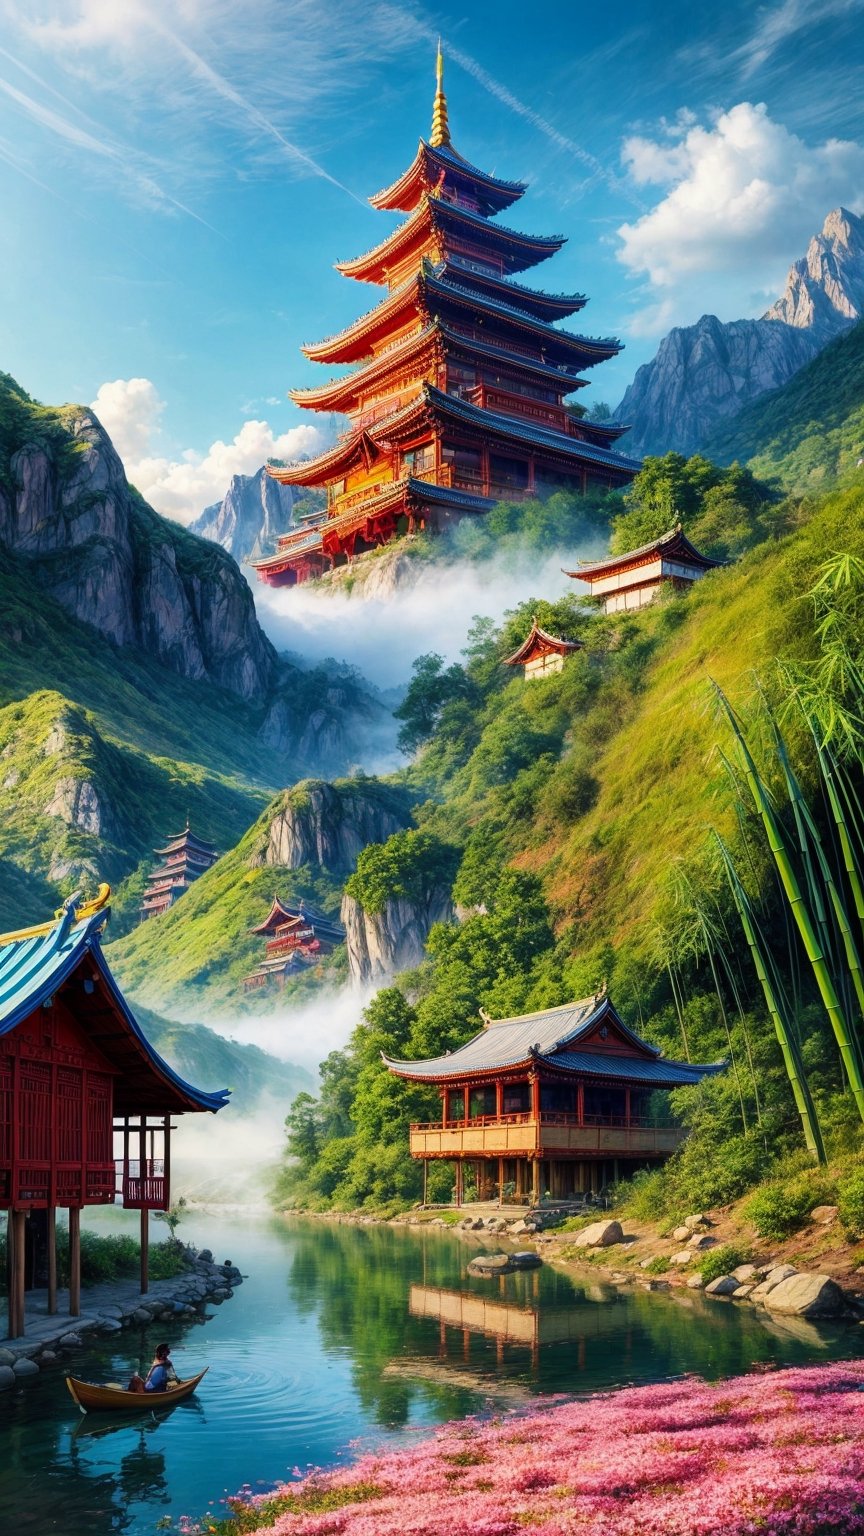 masterpiece, best quality, official_art, aesthetic and beautiful, potrait of bamboo raft in foggy river, flowers and mountains along riverside, spring_season,boats, old fashioned temple on valley, no_human